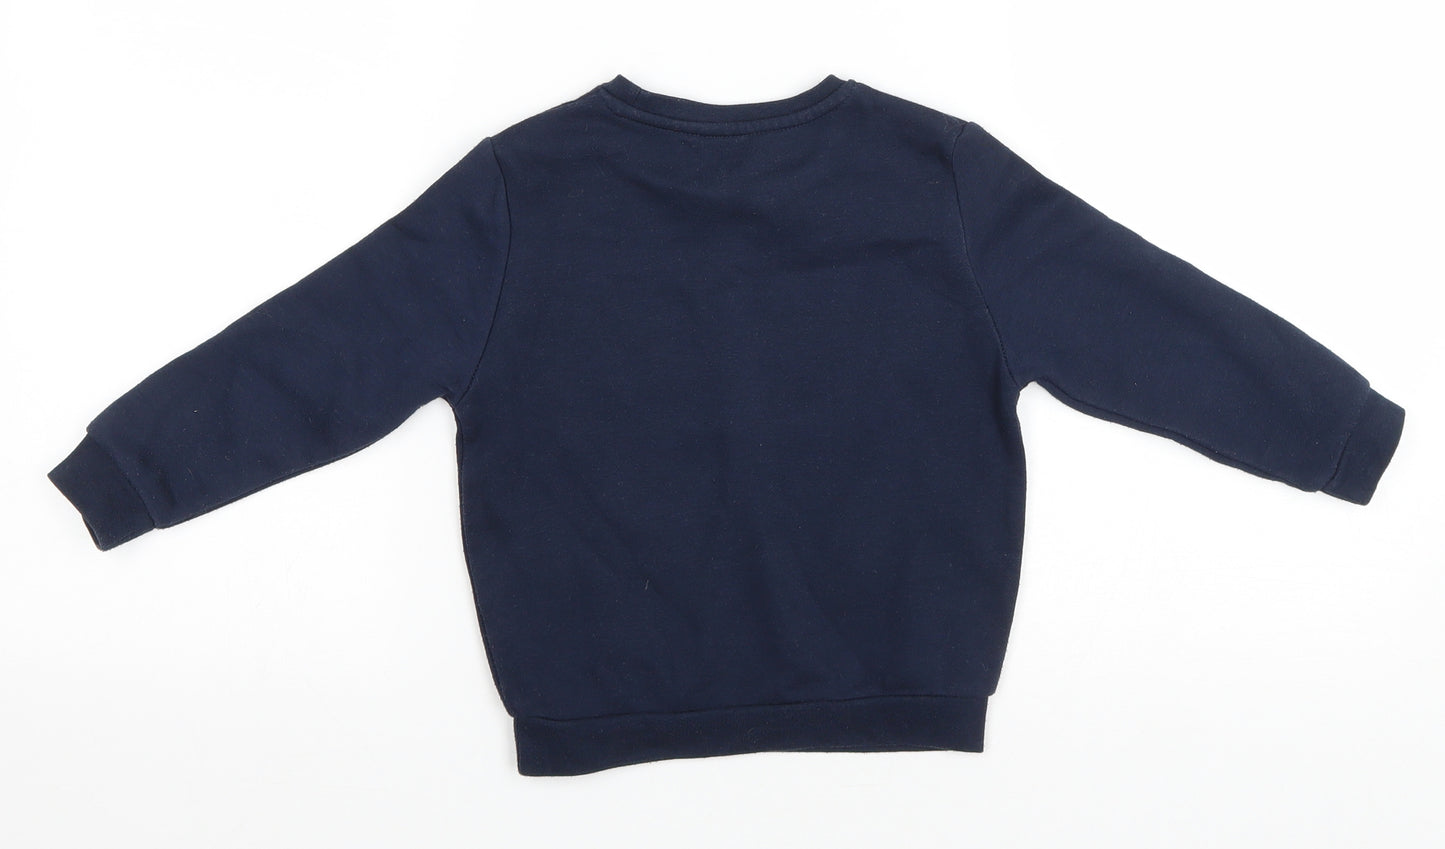 Primark Boys Blue Cotton Pullover Sweatshirt Size 3-4 Years Pullover - You Got This